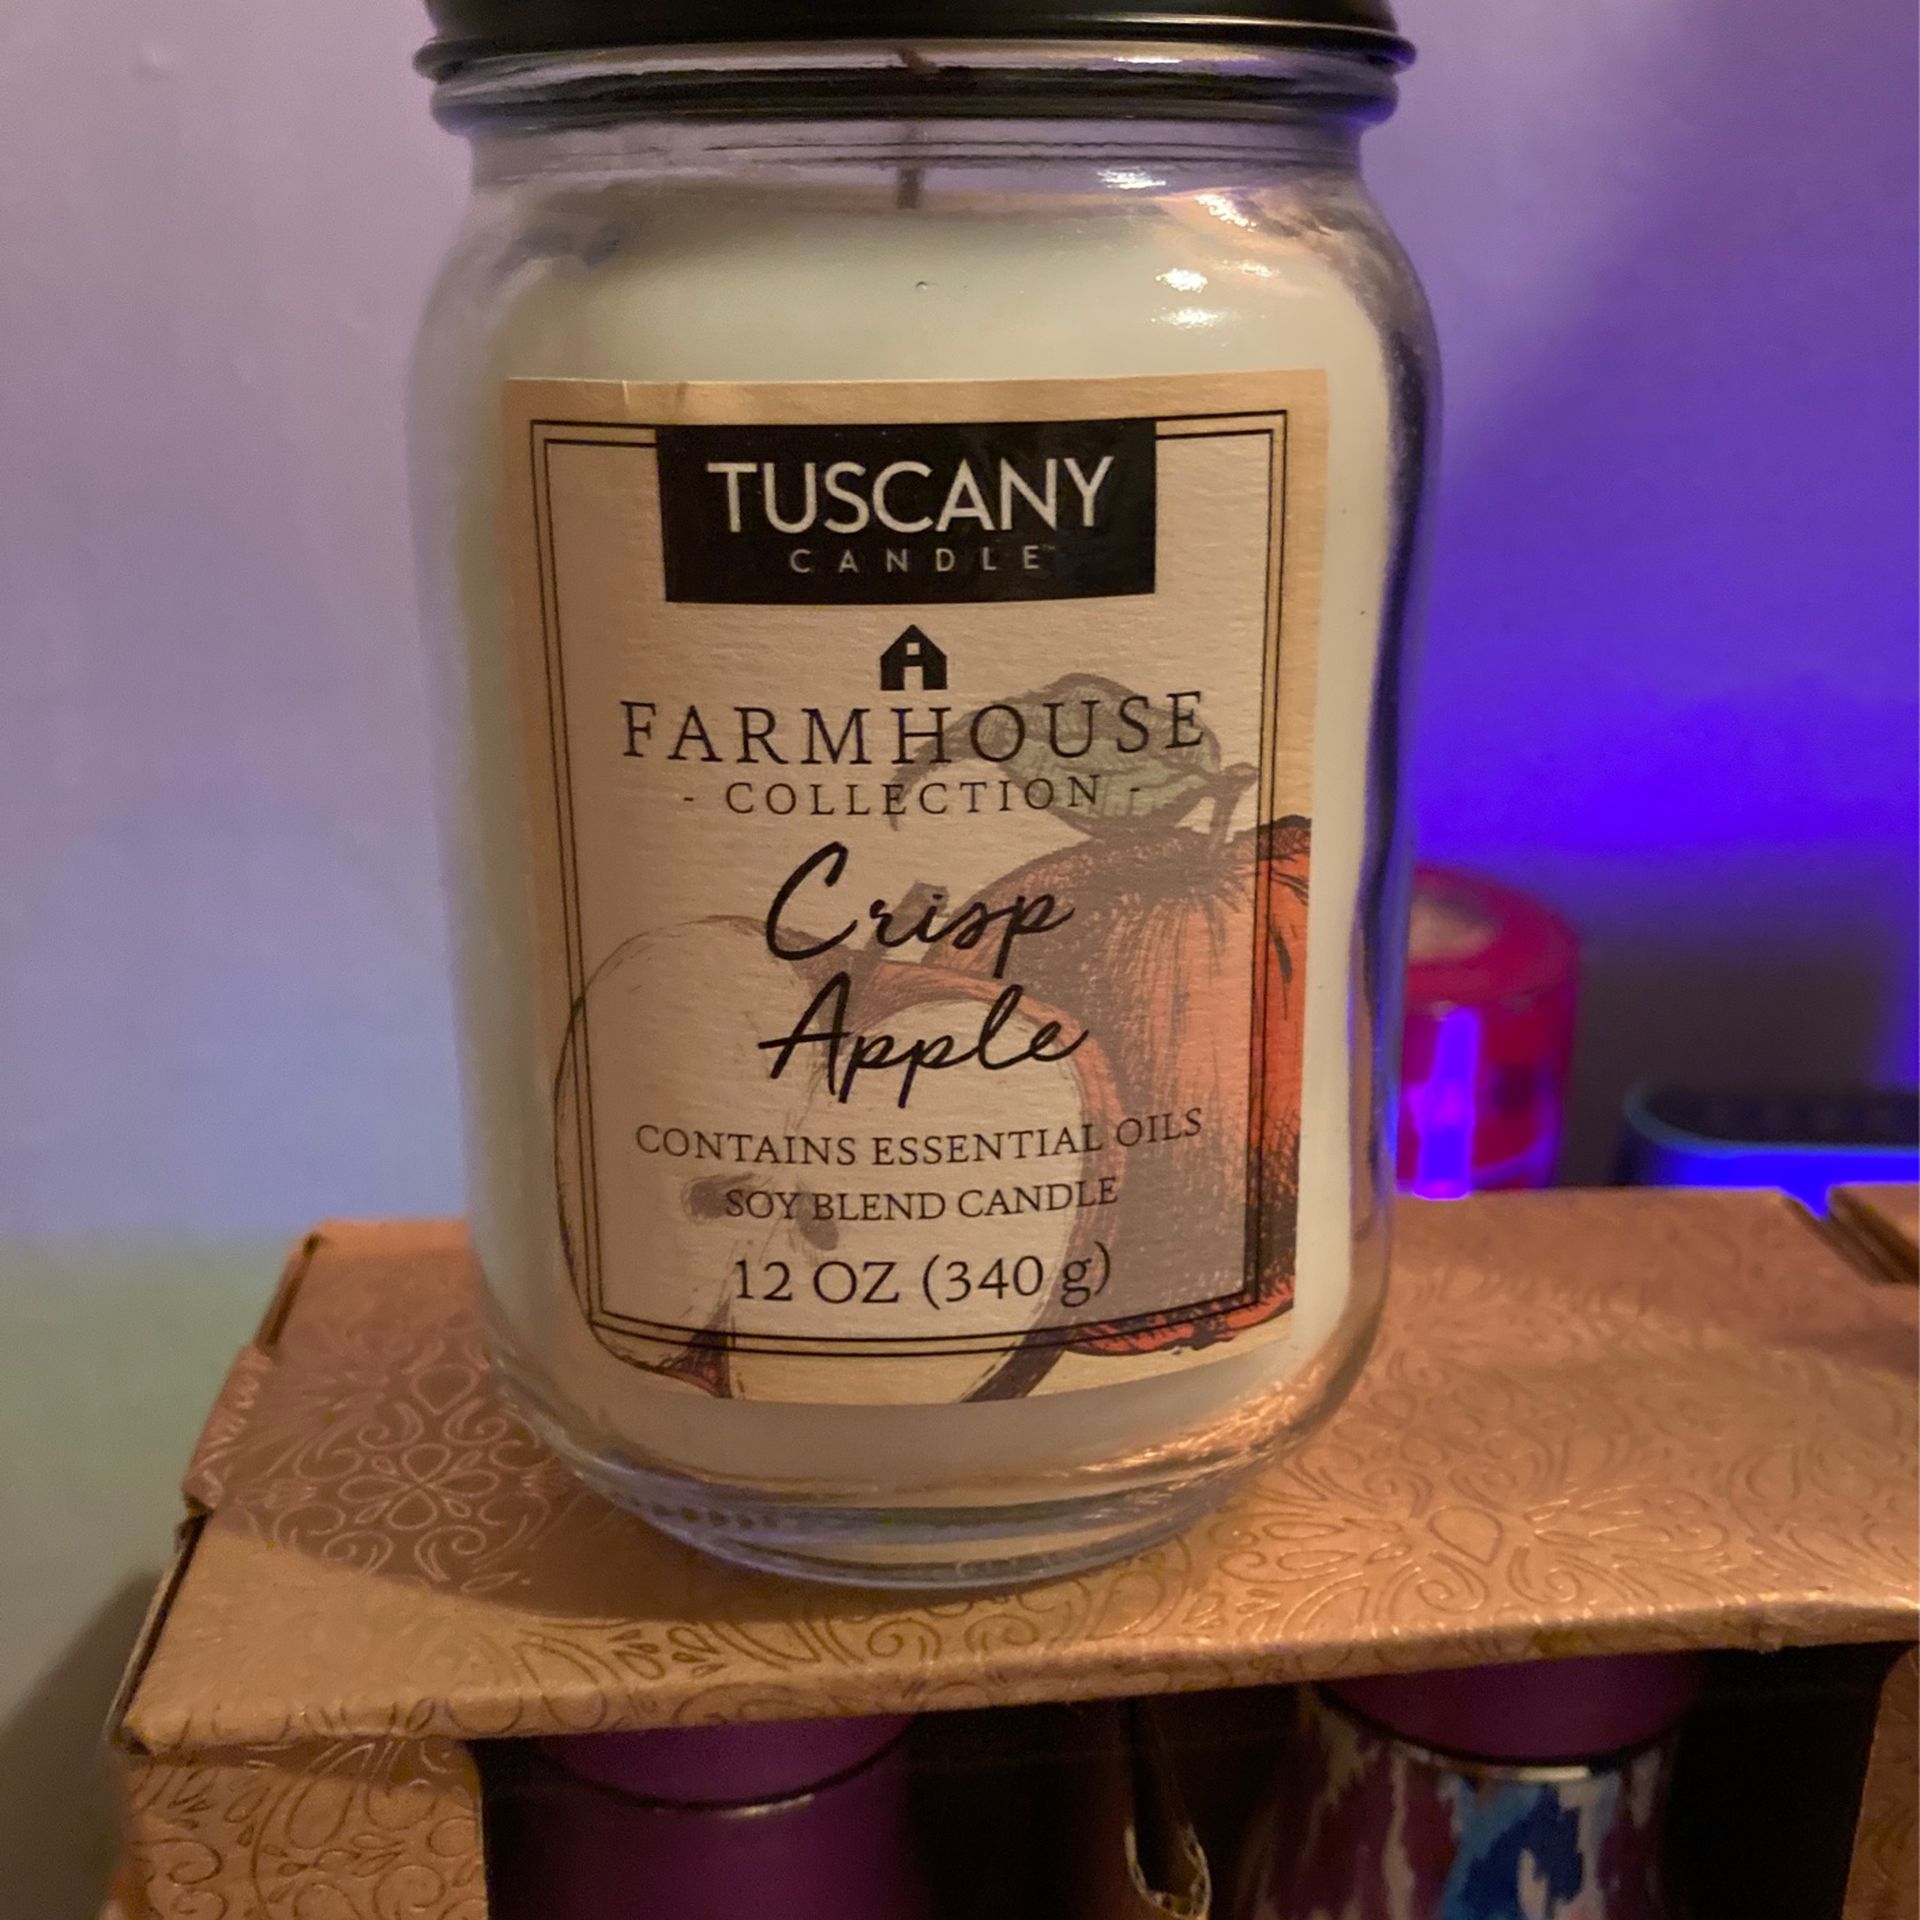 Tuscany farmhouse collection. Crisp Apple candle, 12 ounces brand new.